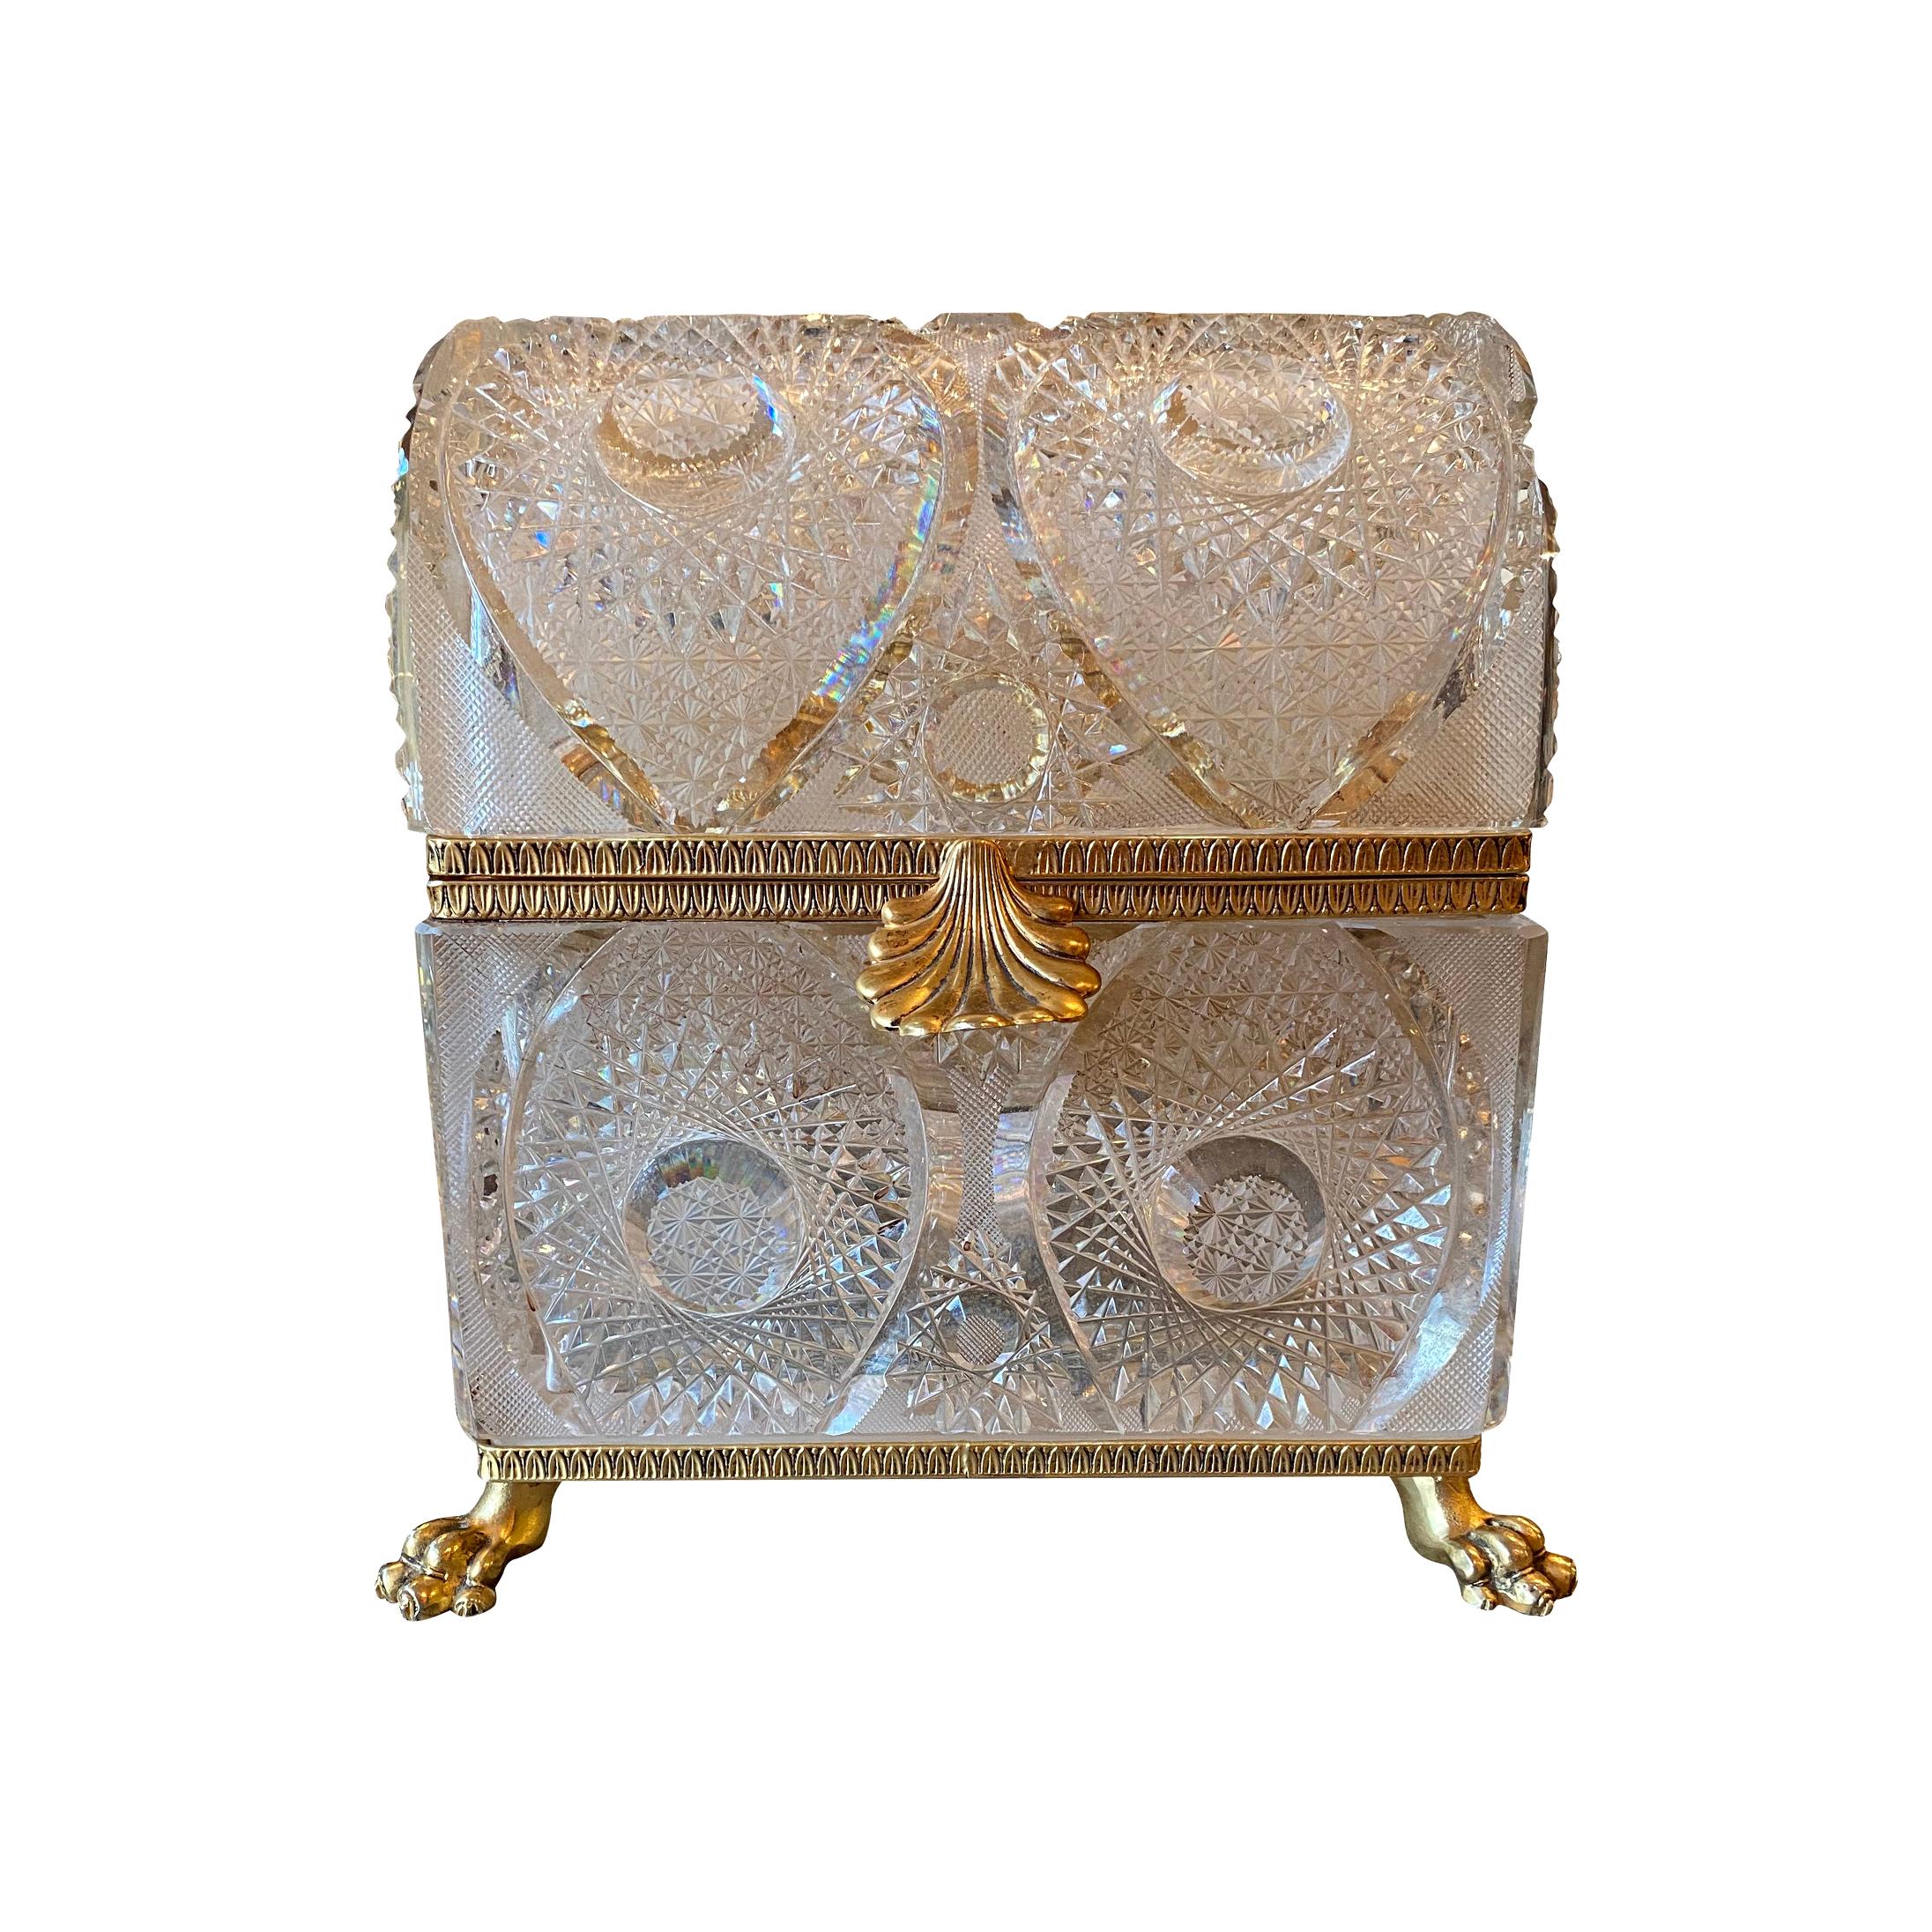 French Gilt Bronze Mounted Cut Glass Domed Casket Cristal Frères, Martin Benito